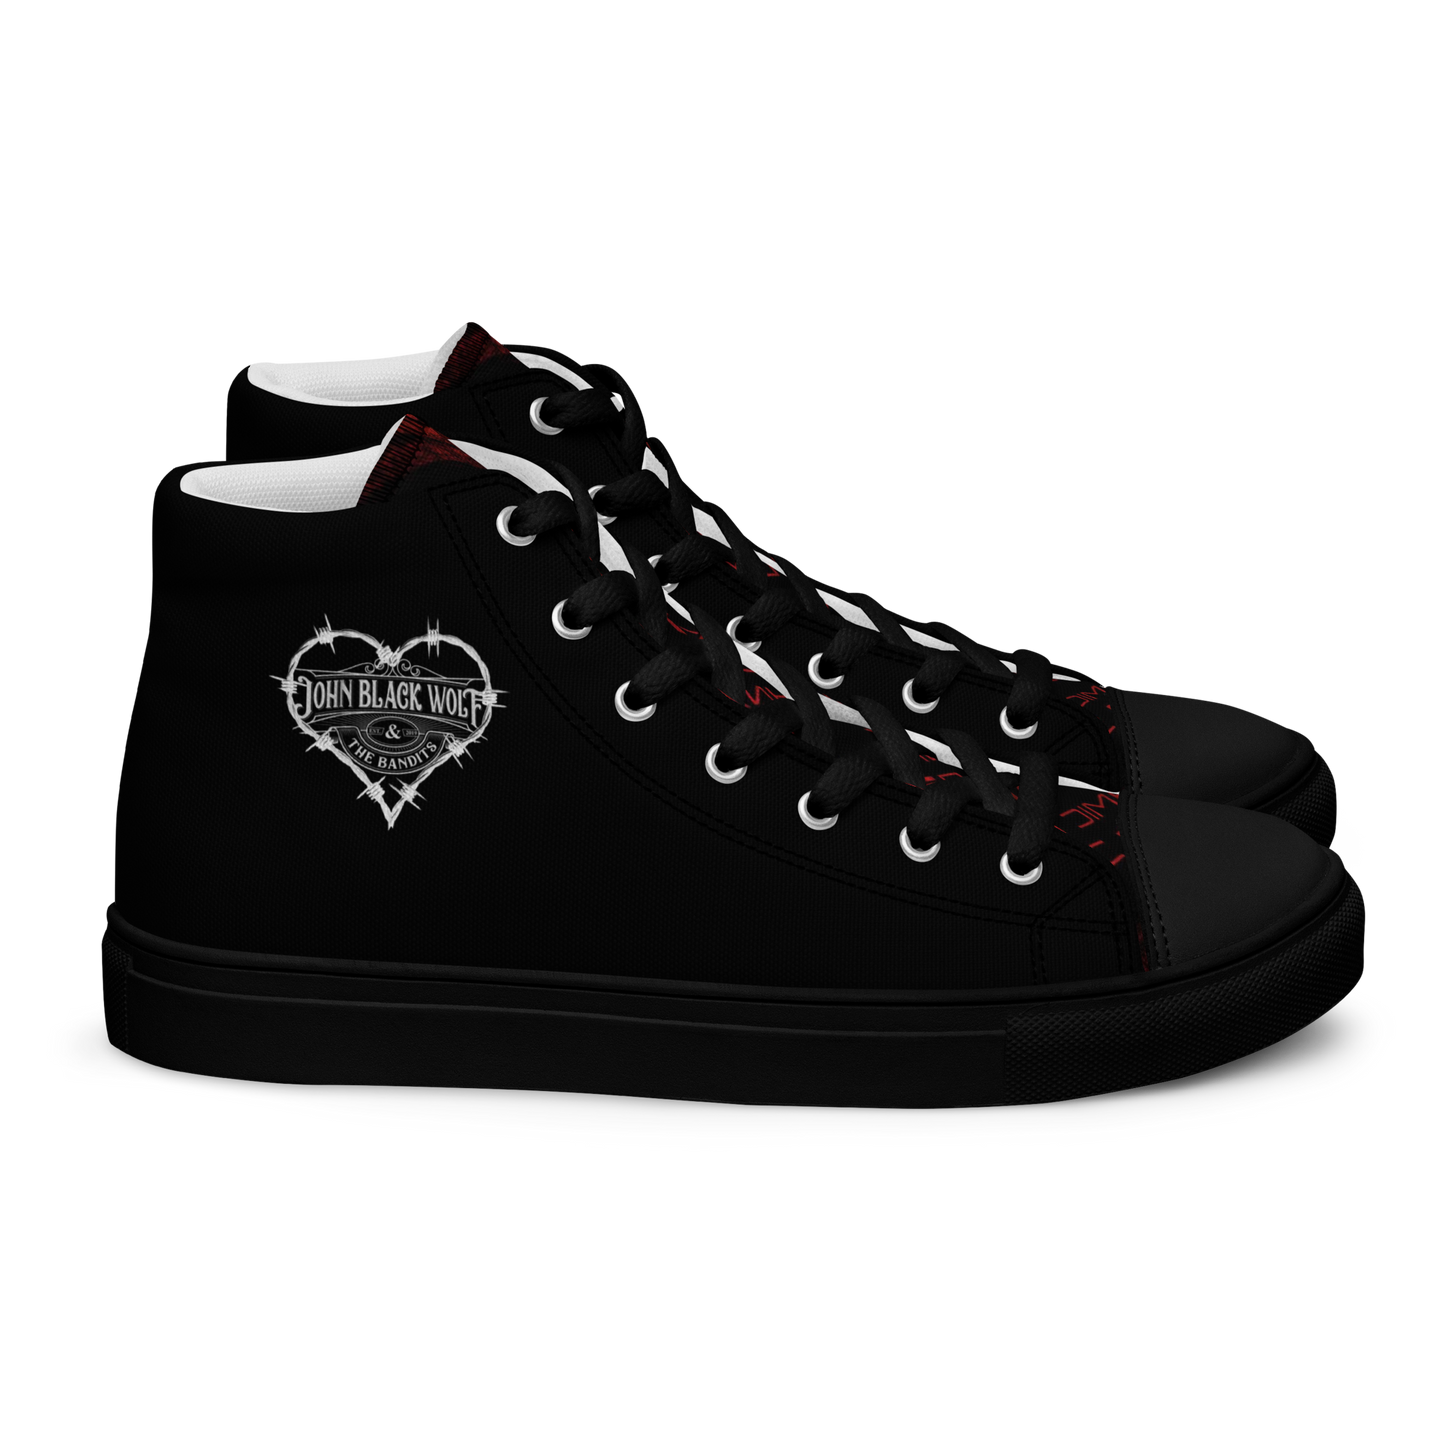 JBW Wire heart, unisex high top canvas shoes